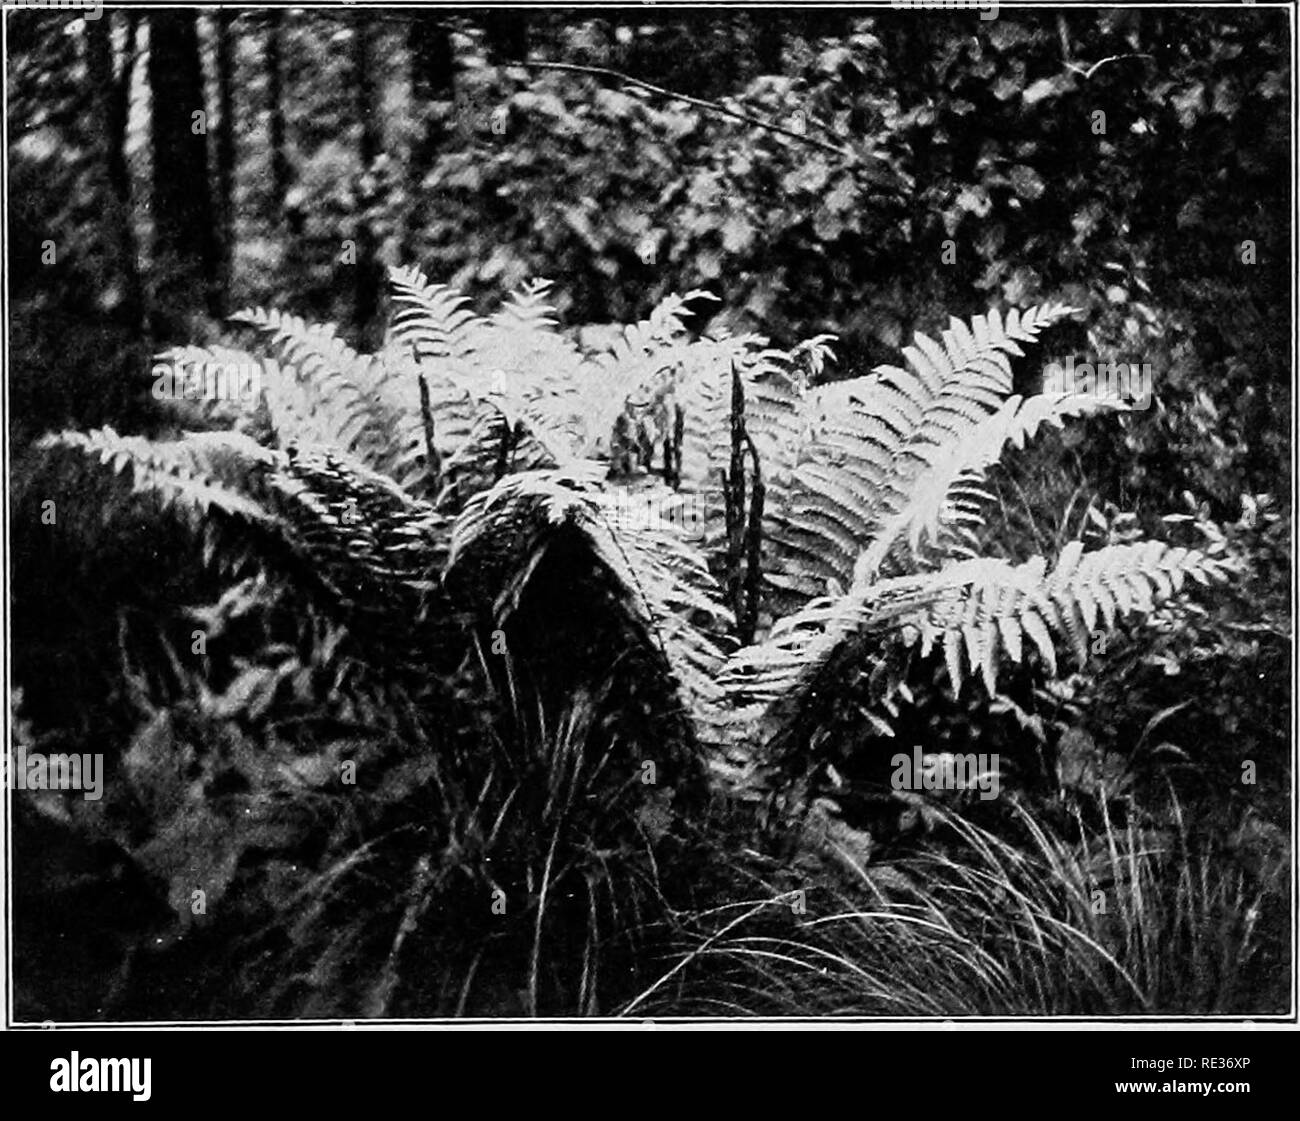 . Fundamentals of botany. Botany. LIFE HISTORY OF A FERN 159 spores may be formed; a sorus will consist of fuUy lOO sporangia, usually more; 20 is a moderate estimate of the sori on an average pinna; there may be fully so fertile pinnas on one well-developed leaf, and a strong plant would bear 10 fertile leaves. 48 X 100 X 20 X 50 X 10 = 48,000,000. The output of spores on a strong plant in the single season wiU thus, on a moderate estimate, approach the enormous number of fifty millions&quot;- 148. TjT)es of Sporophylls.—In many ferns the leaves serve both vegetative and reproductive function Stock Photo